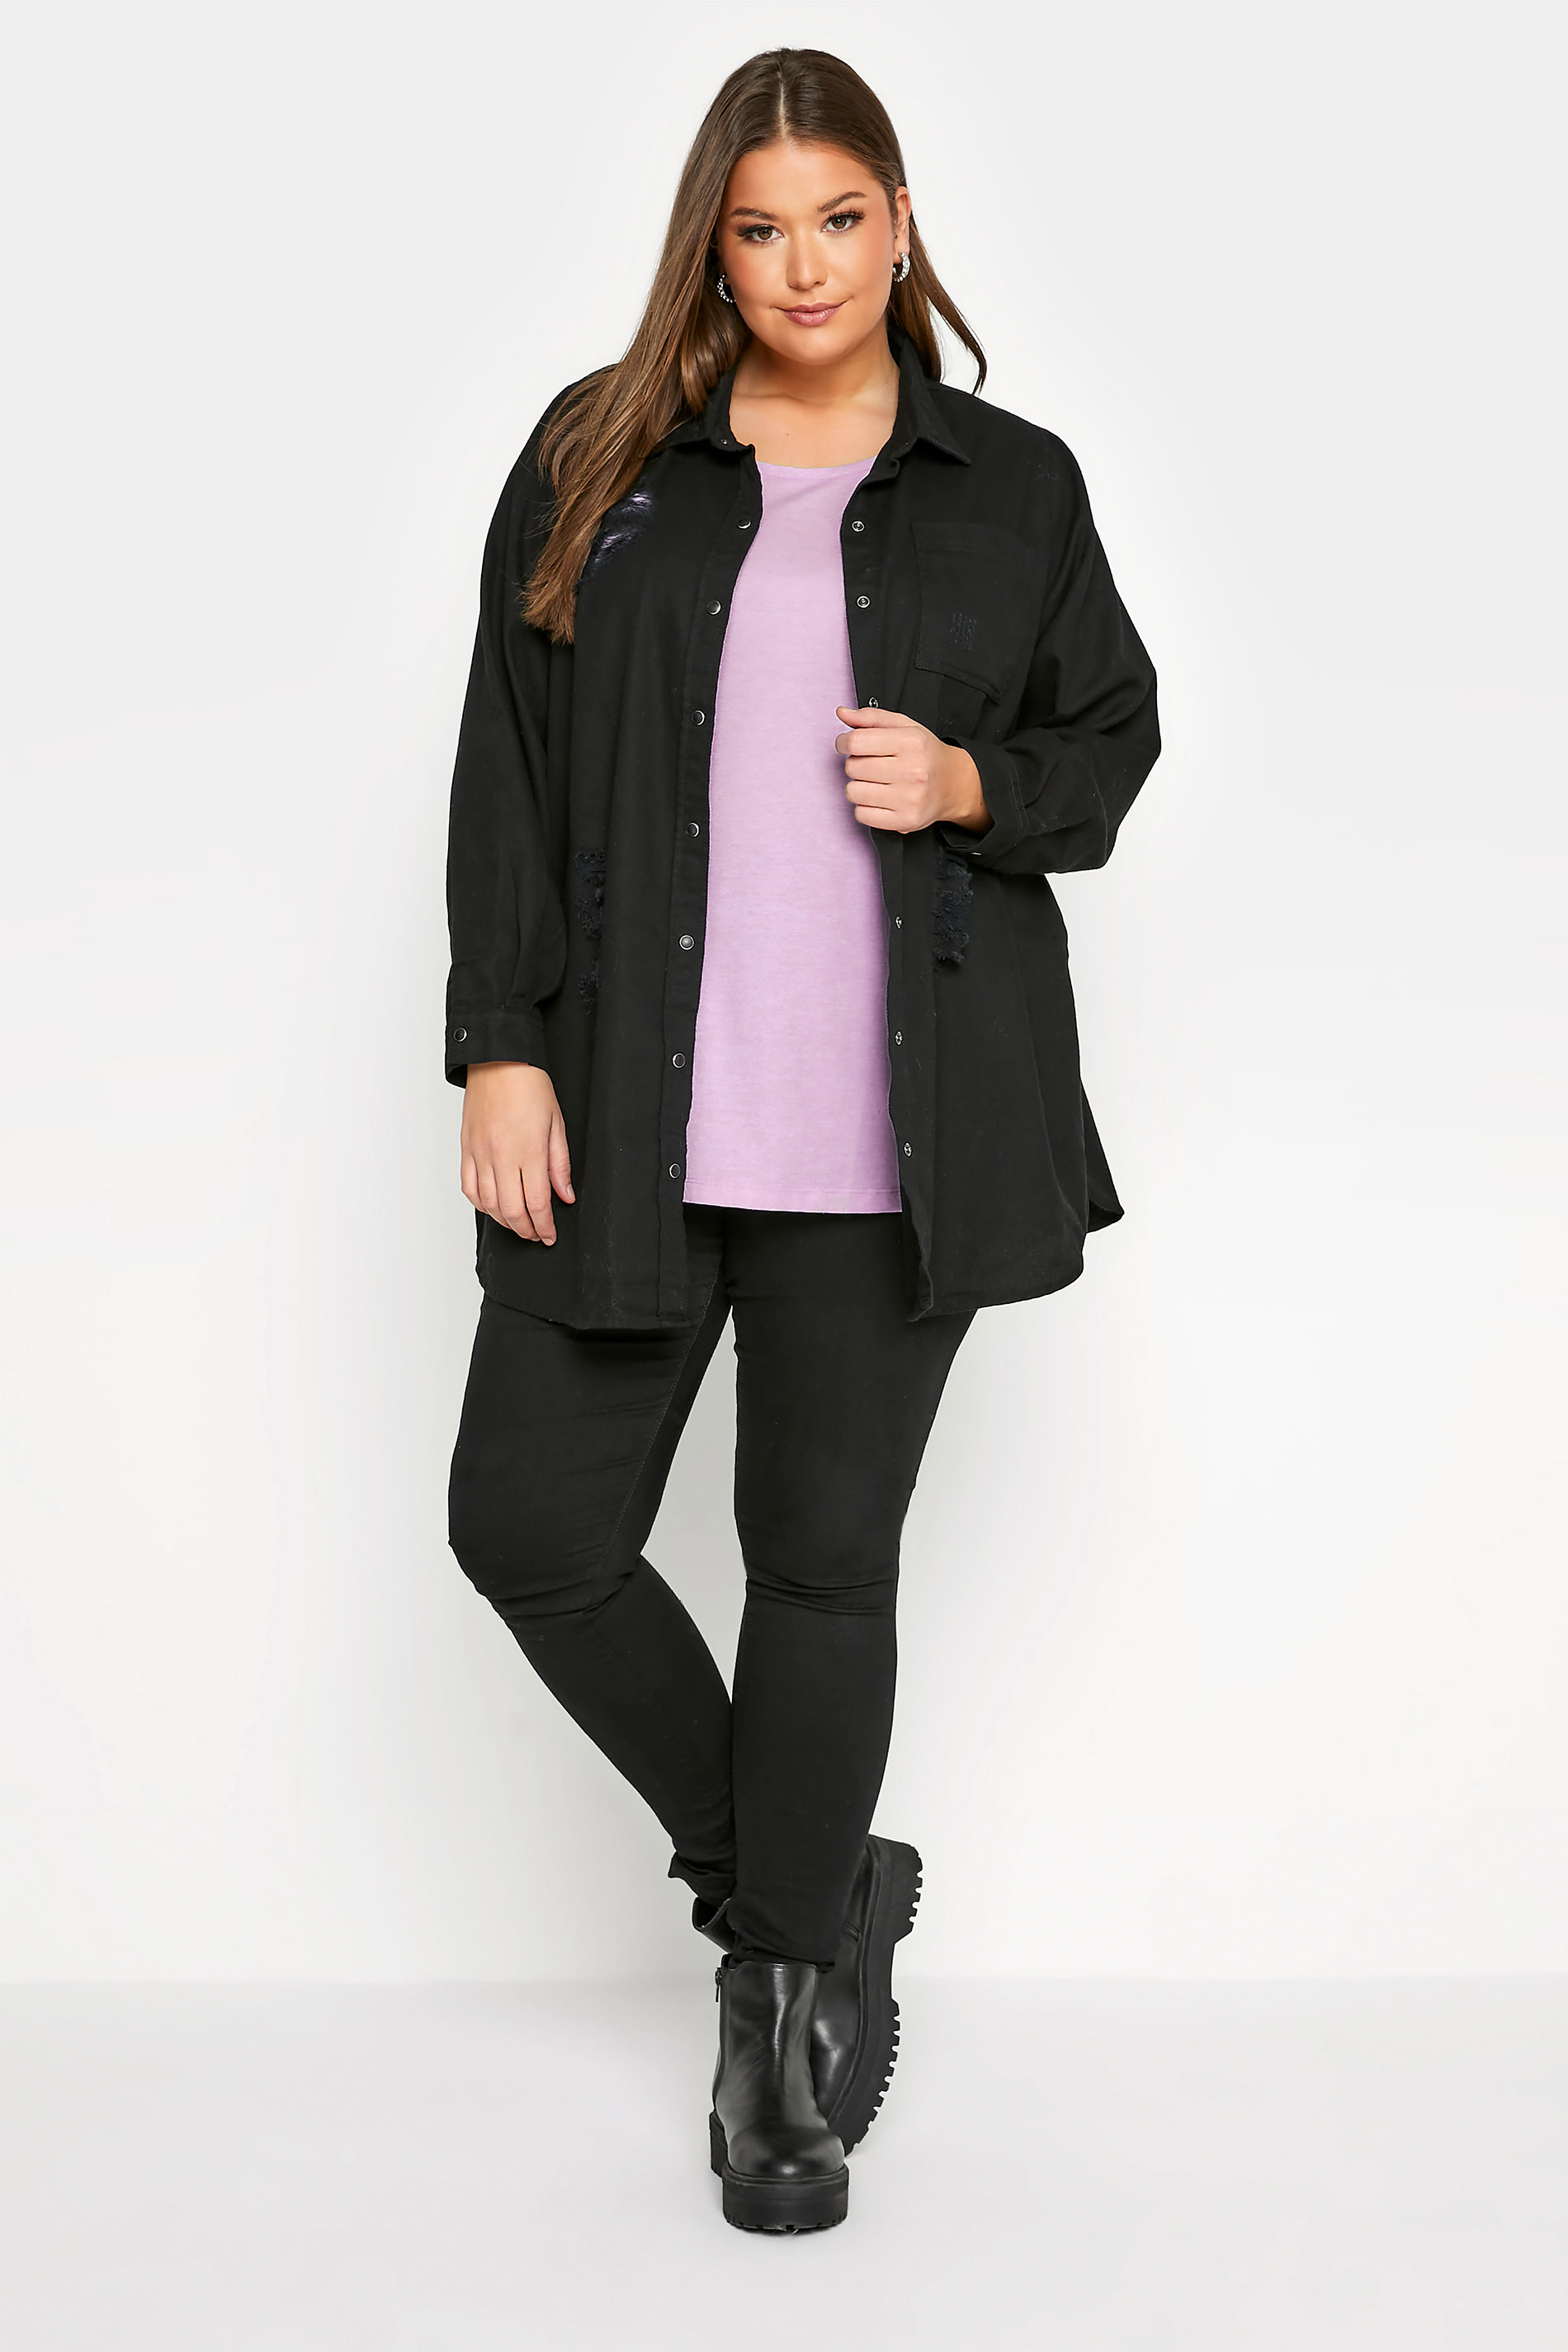 Grande taille  Tops Grande taille  Tops Jersey | T-Shirt Couleur Lavande Manches Courtes - JY14736